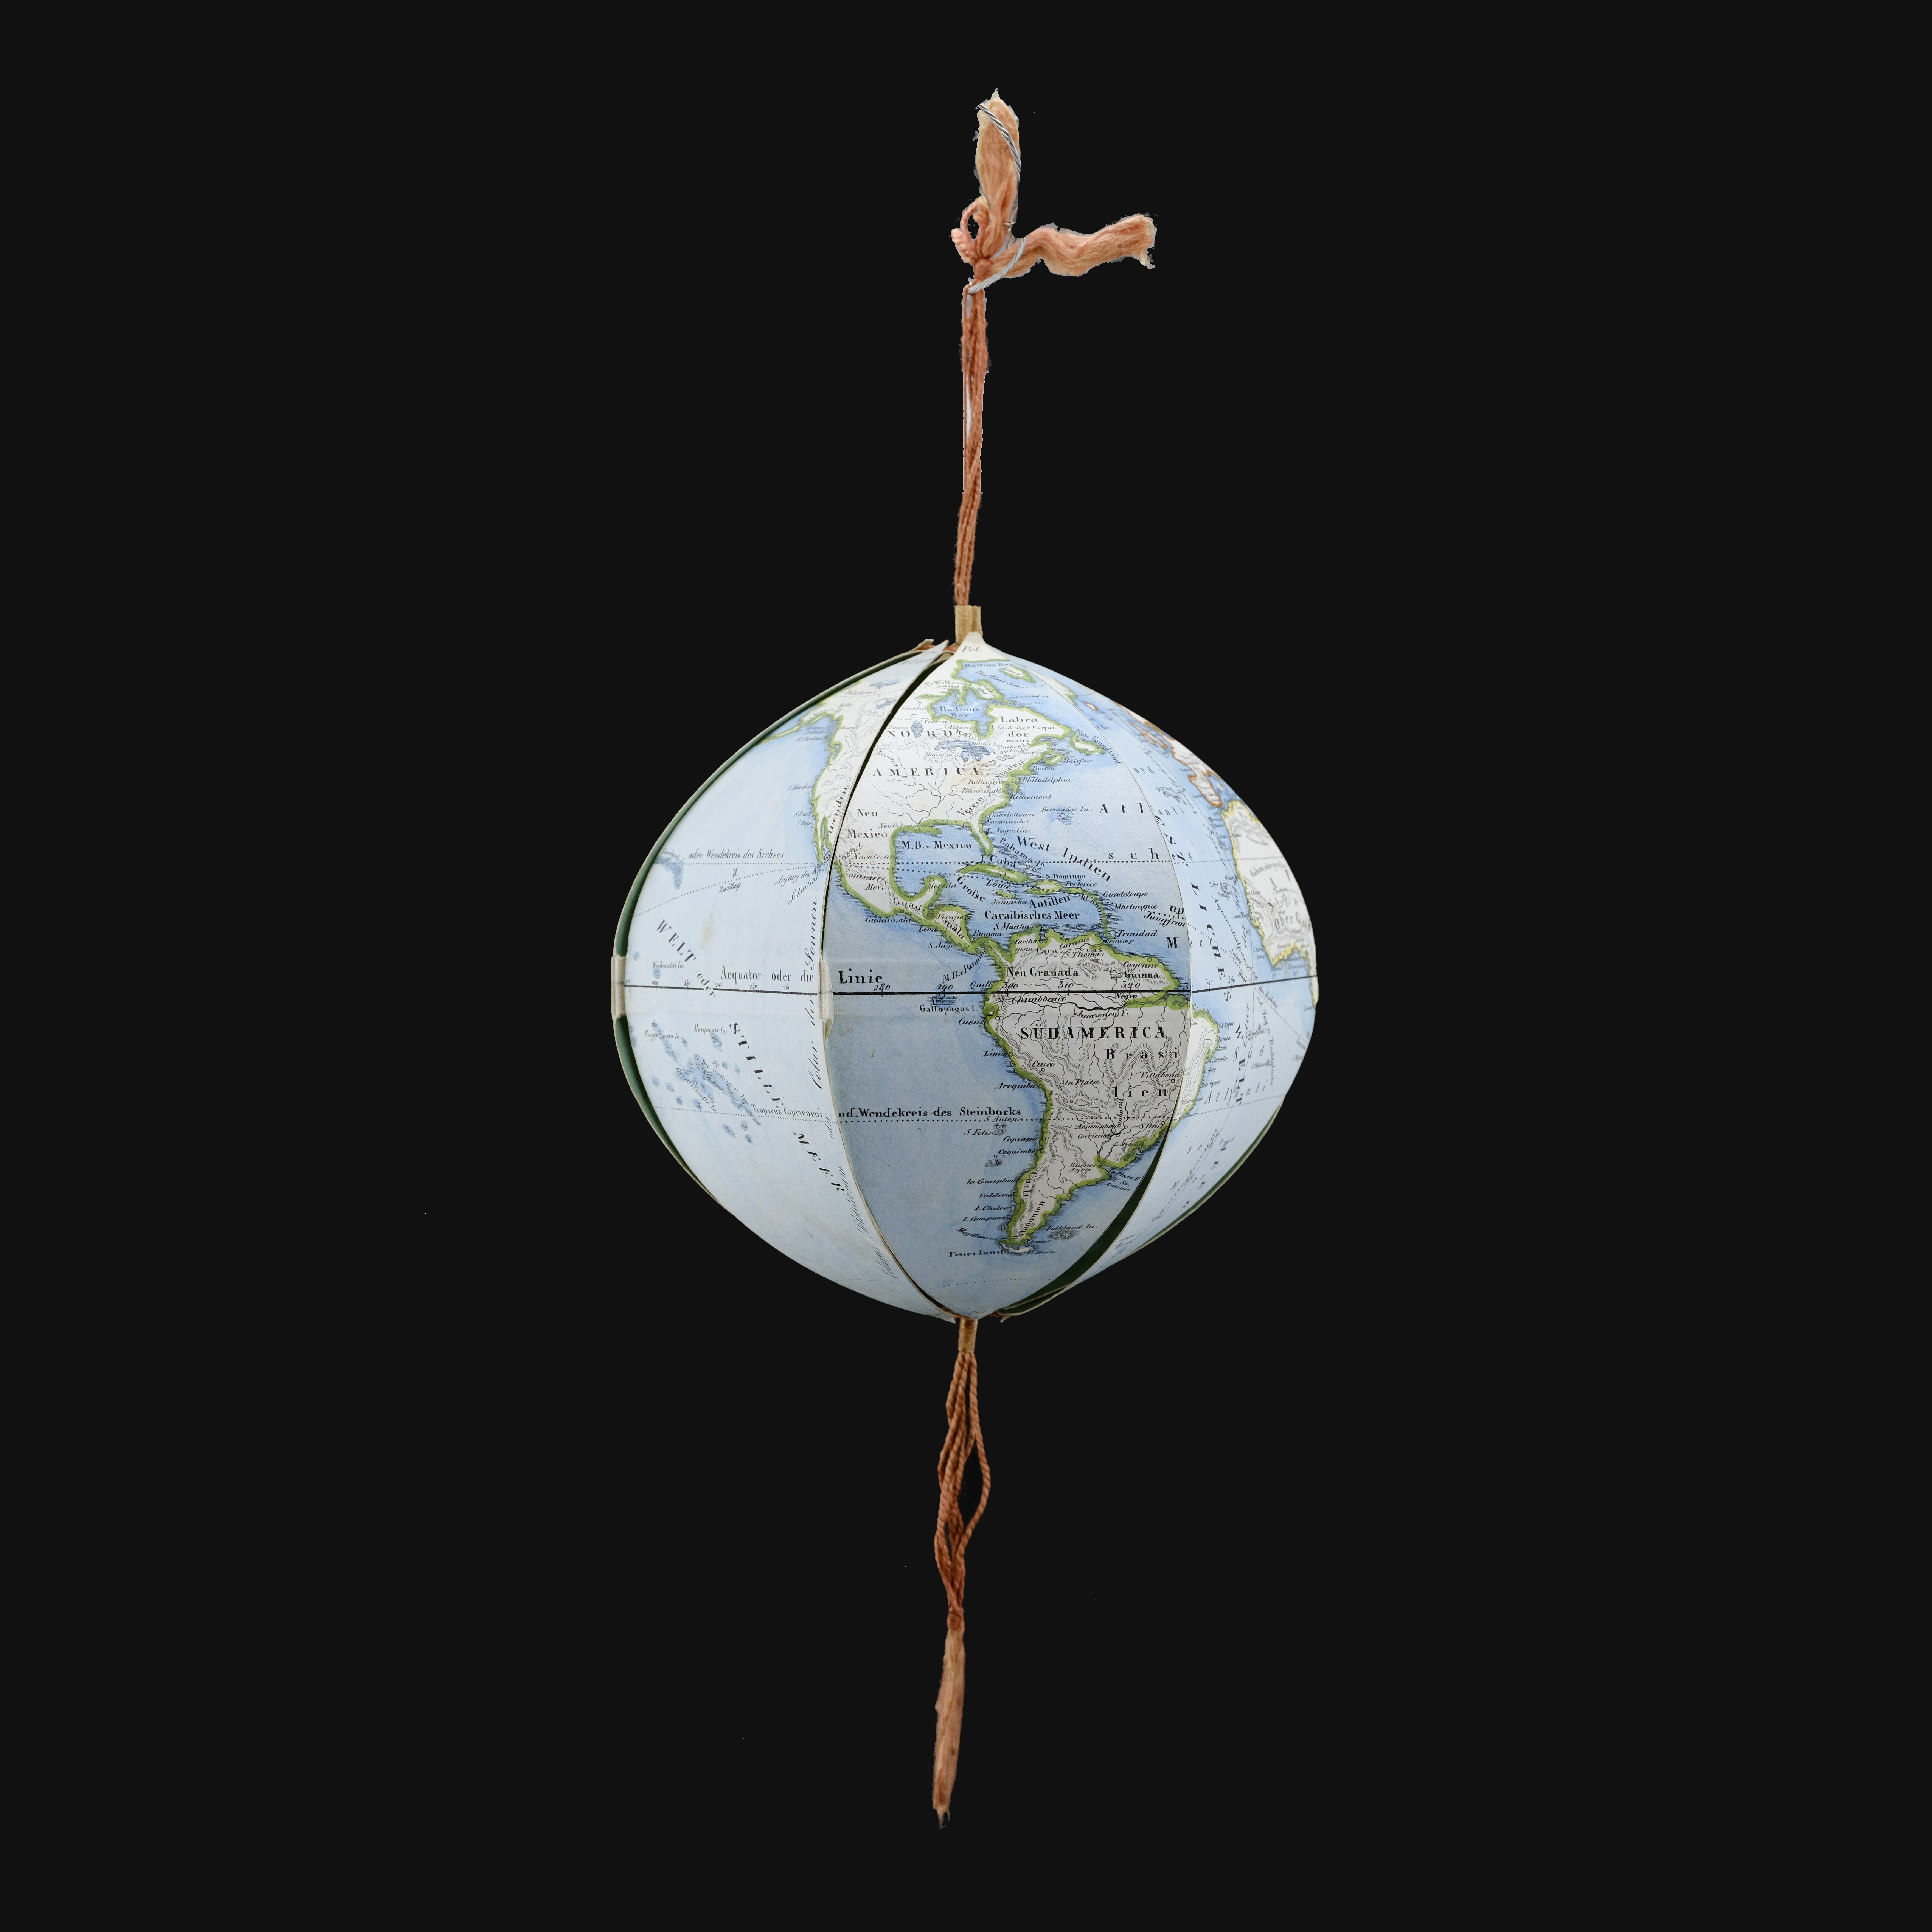 World & Celestial Globes, Maps, Atlases, Globes, Antiques